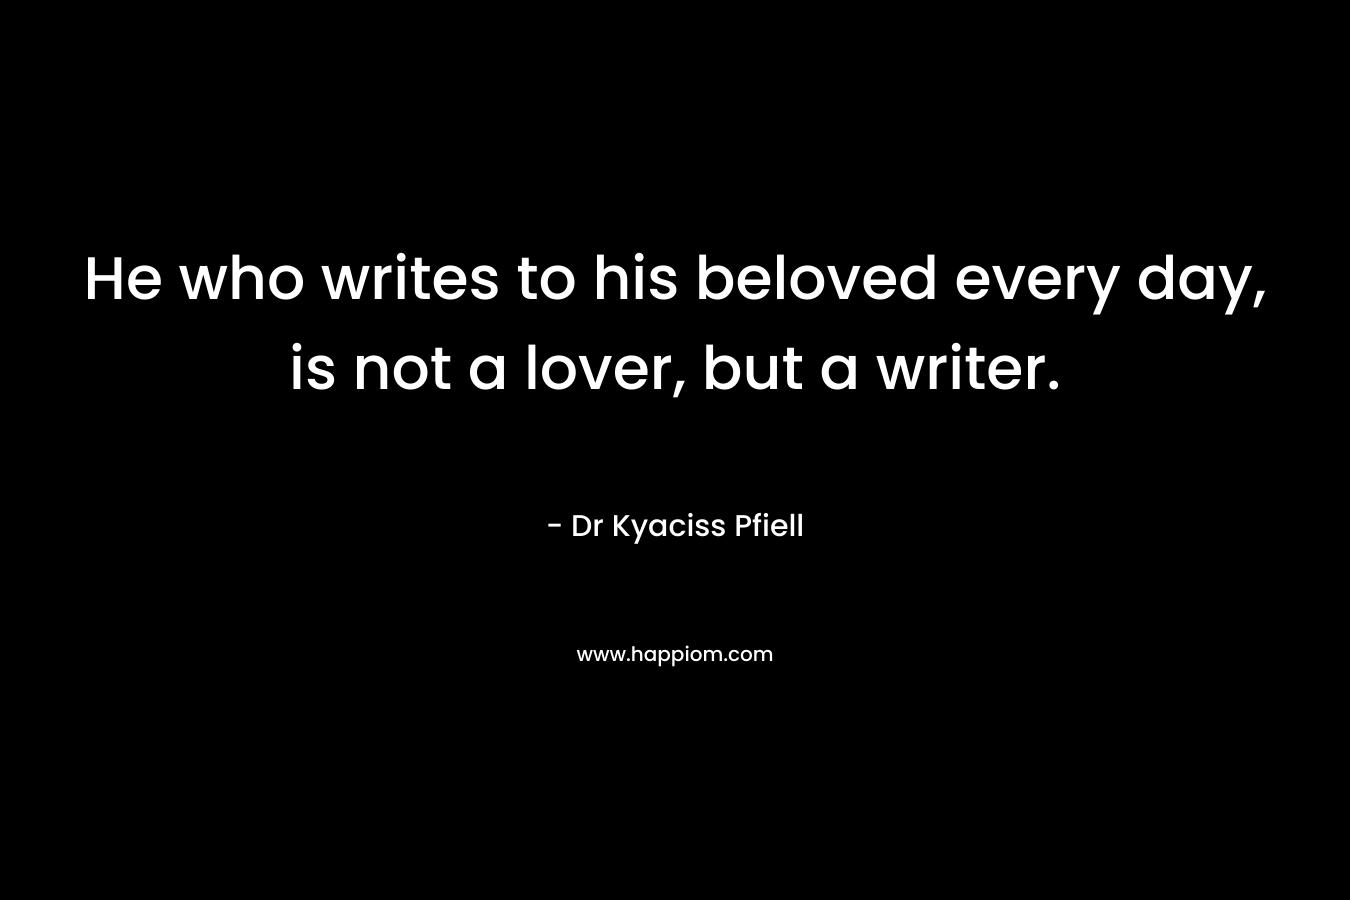 He who writes to his beloved every day, is not a lover, but a writer. – Dr Kyaciss Pfiell